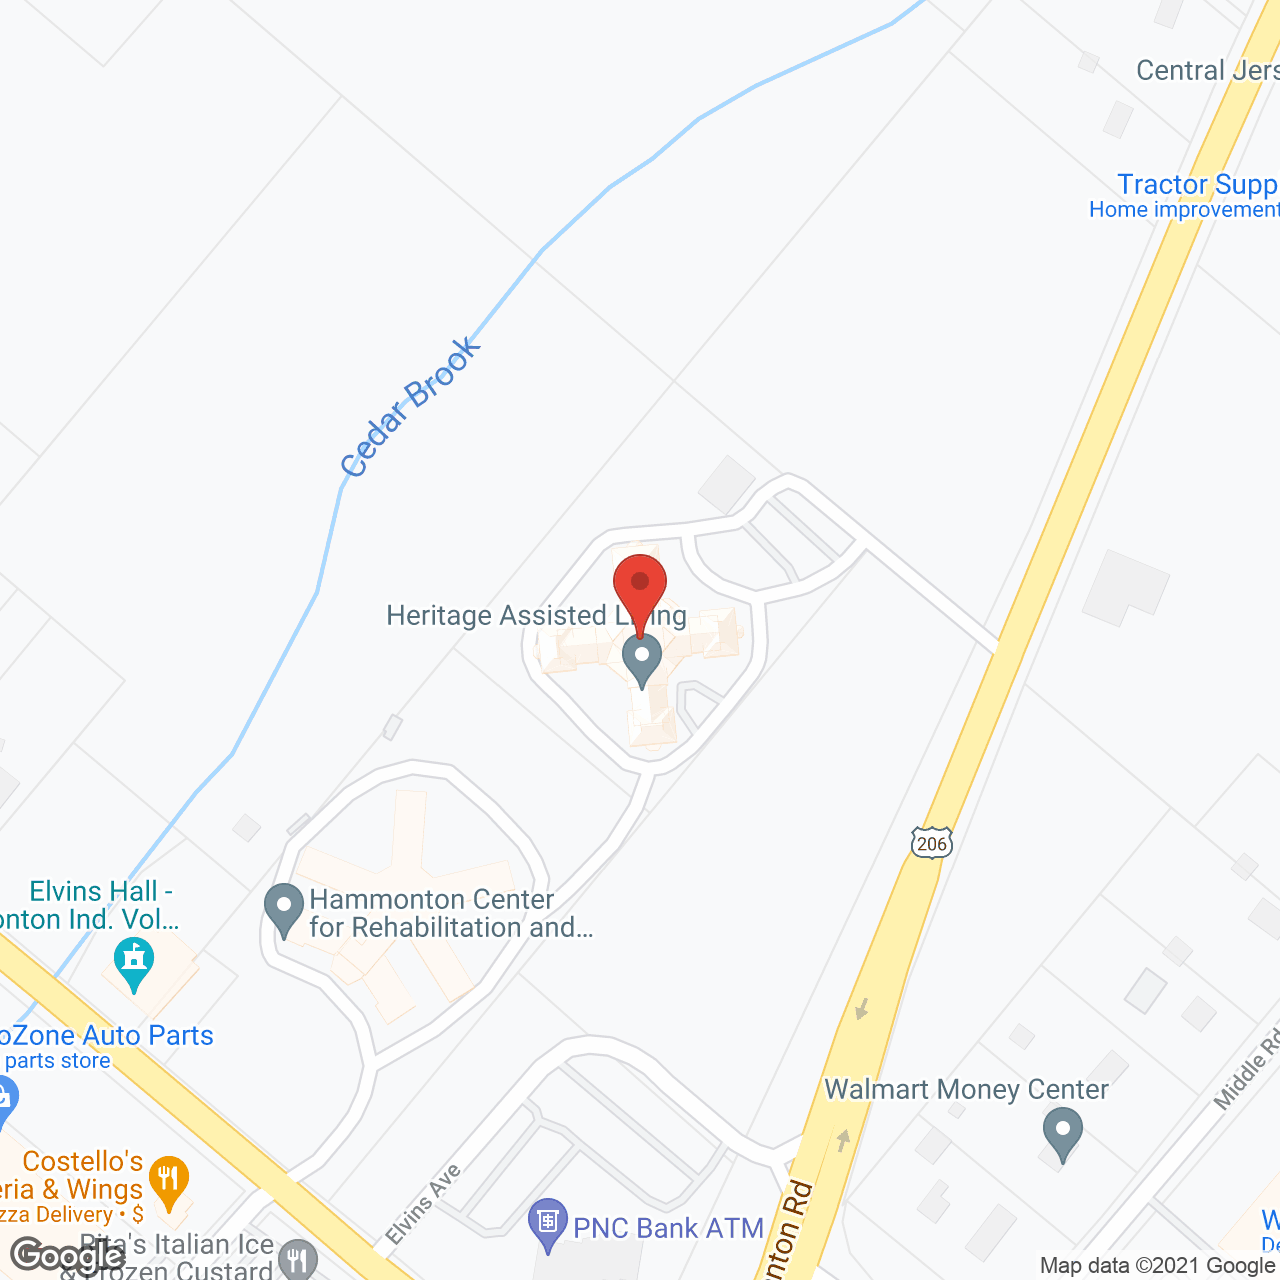 The Heritage Assisted Living in google map